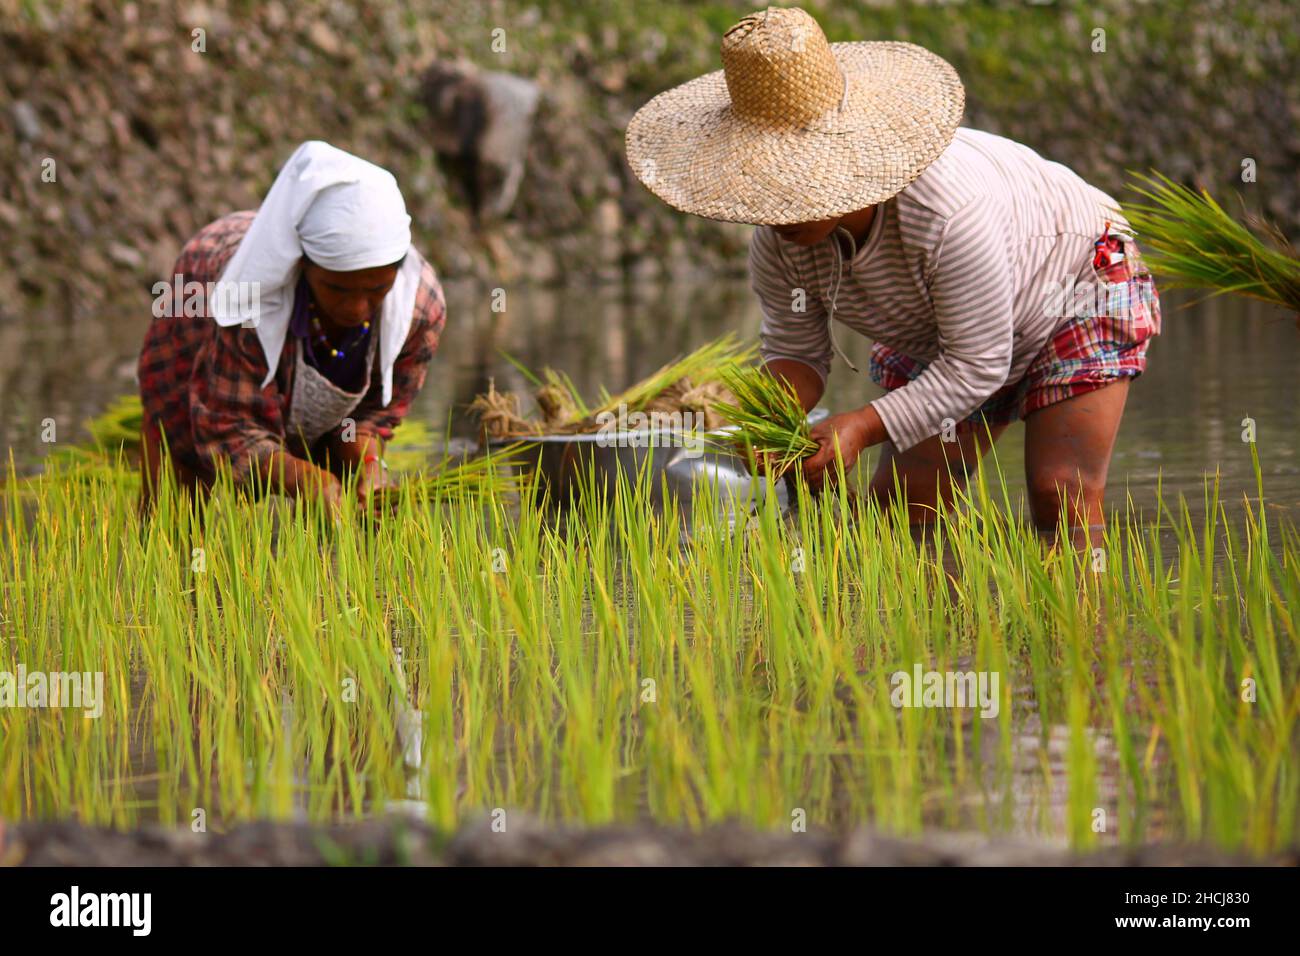 Filipino women planting rice by hand in a terrace in Tinglayan, the Philippines Stock Photo